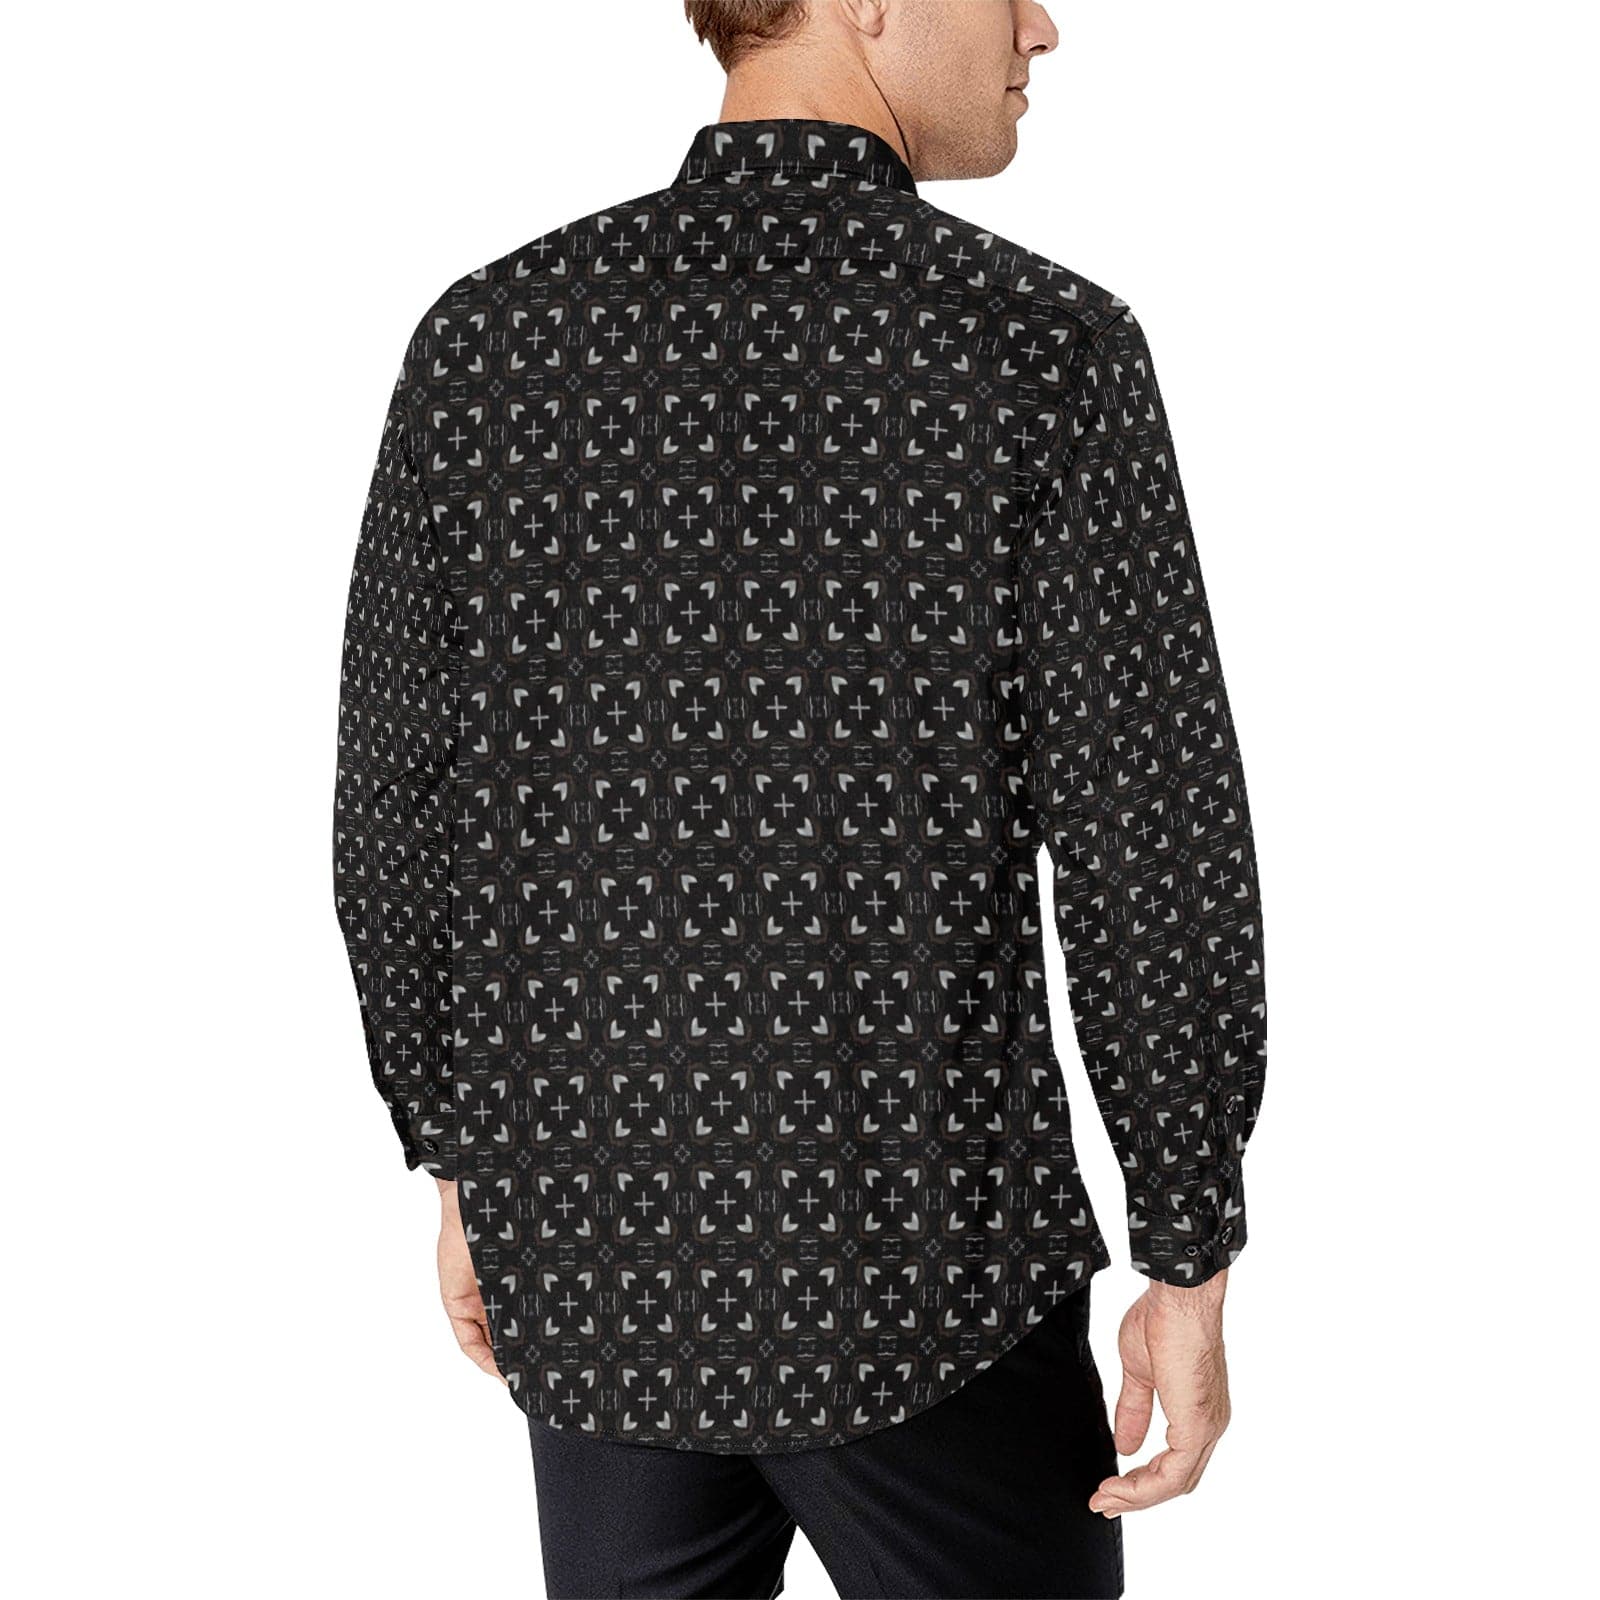 Black Shirt with Geometrical Squares Pattern for Men Long Sleeve Shirt (Without Pocket)